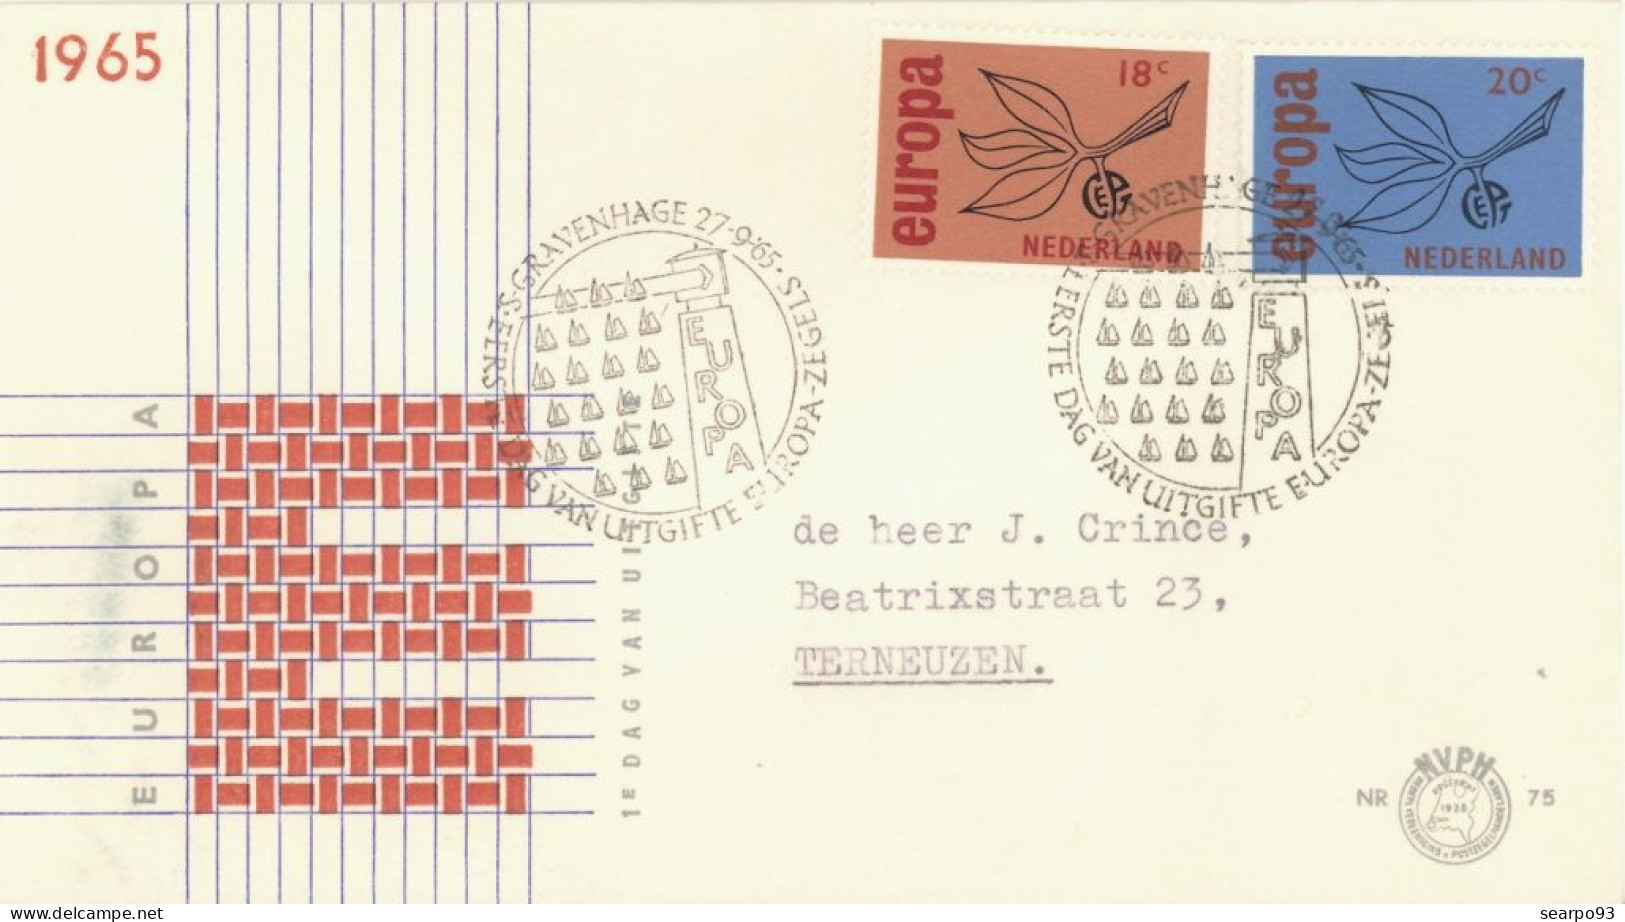 NETHERLANDS. FDC. EUROPA CEPT. 1965 - FDC